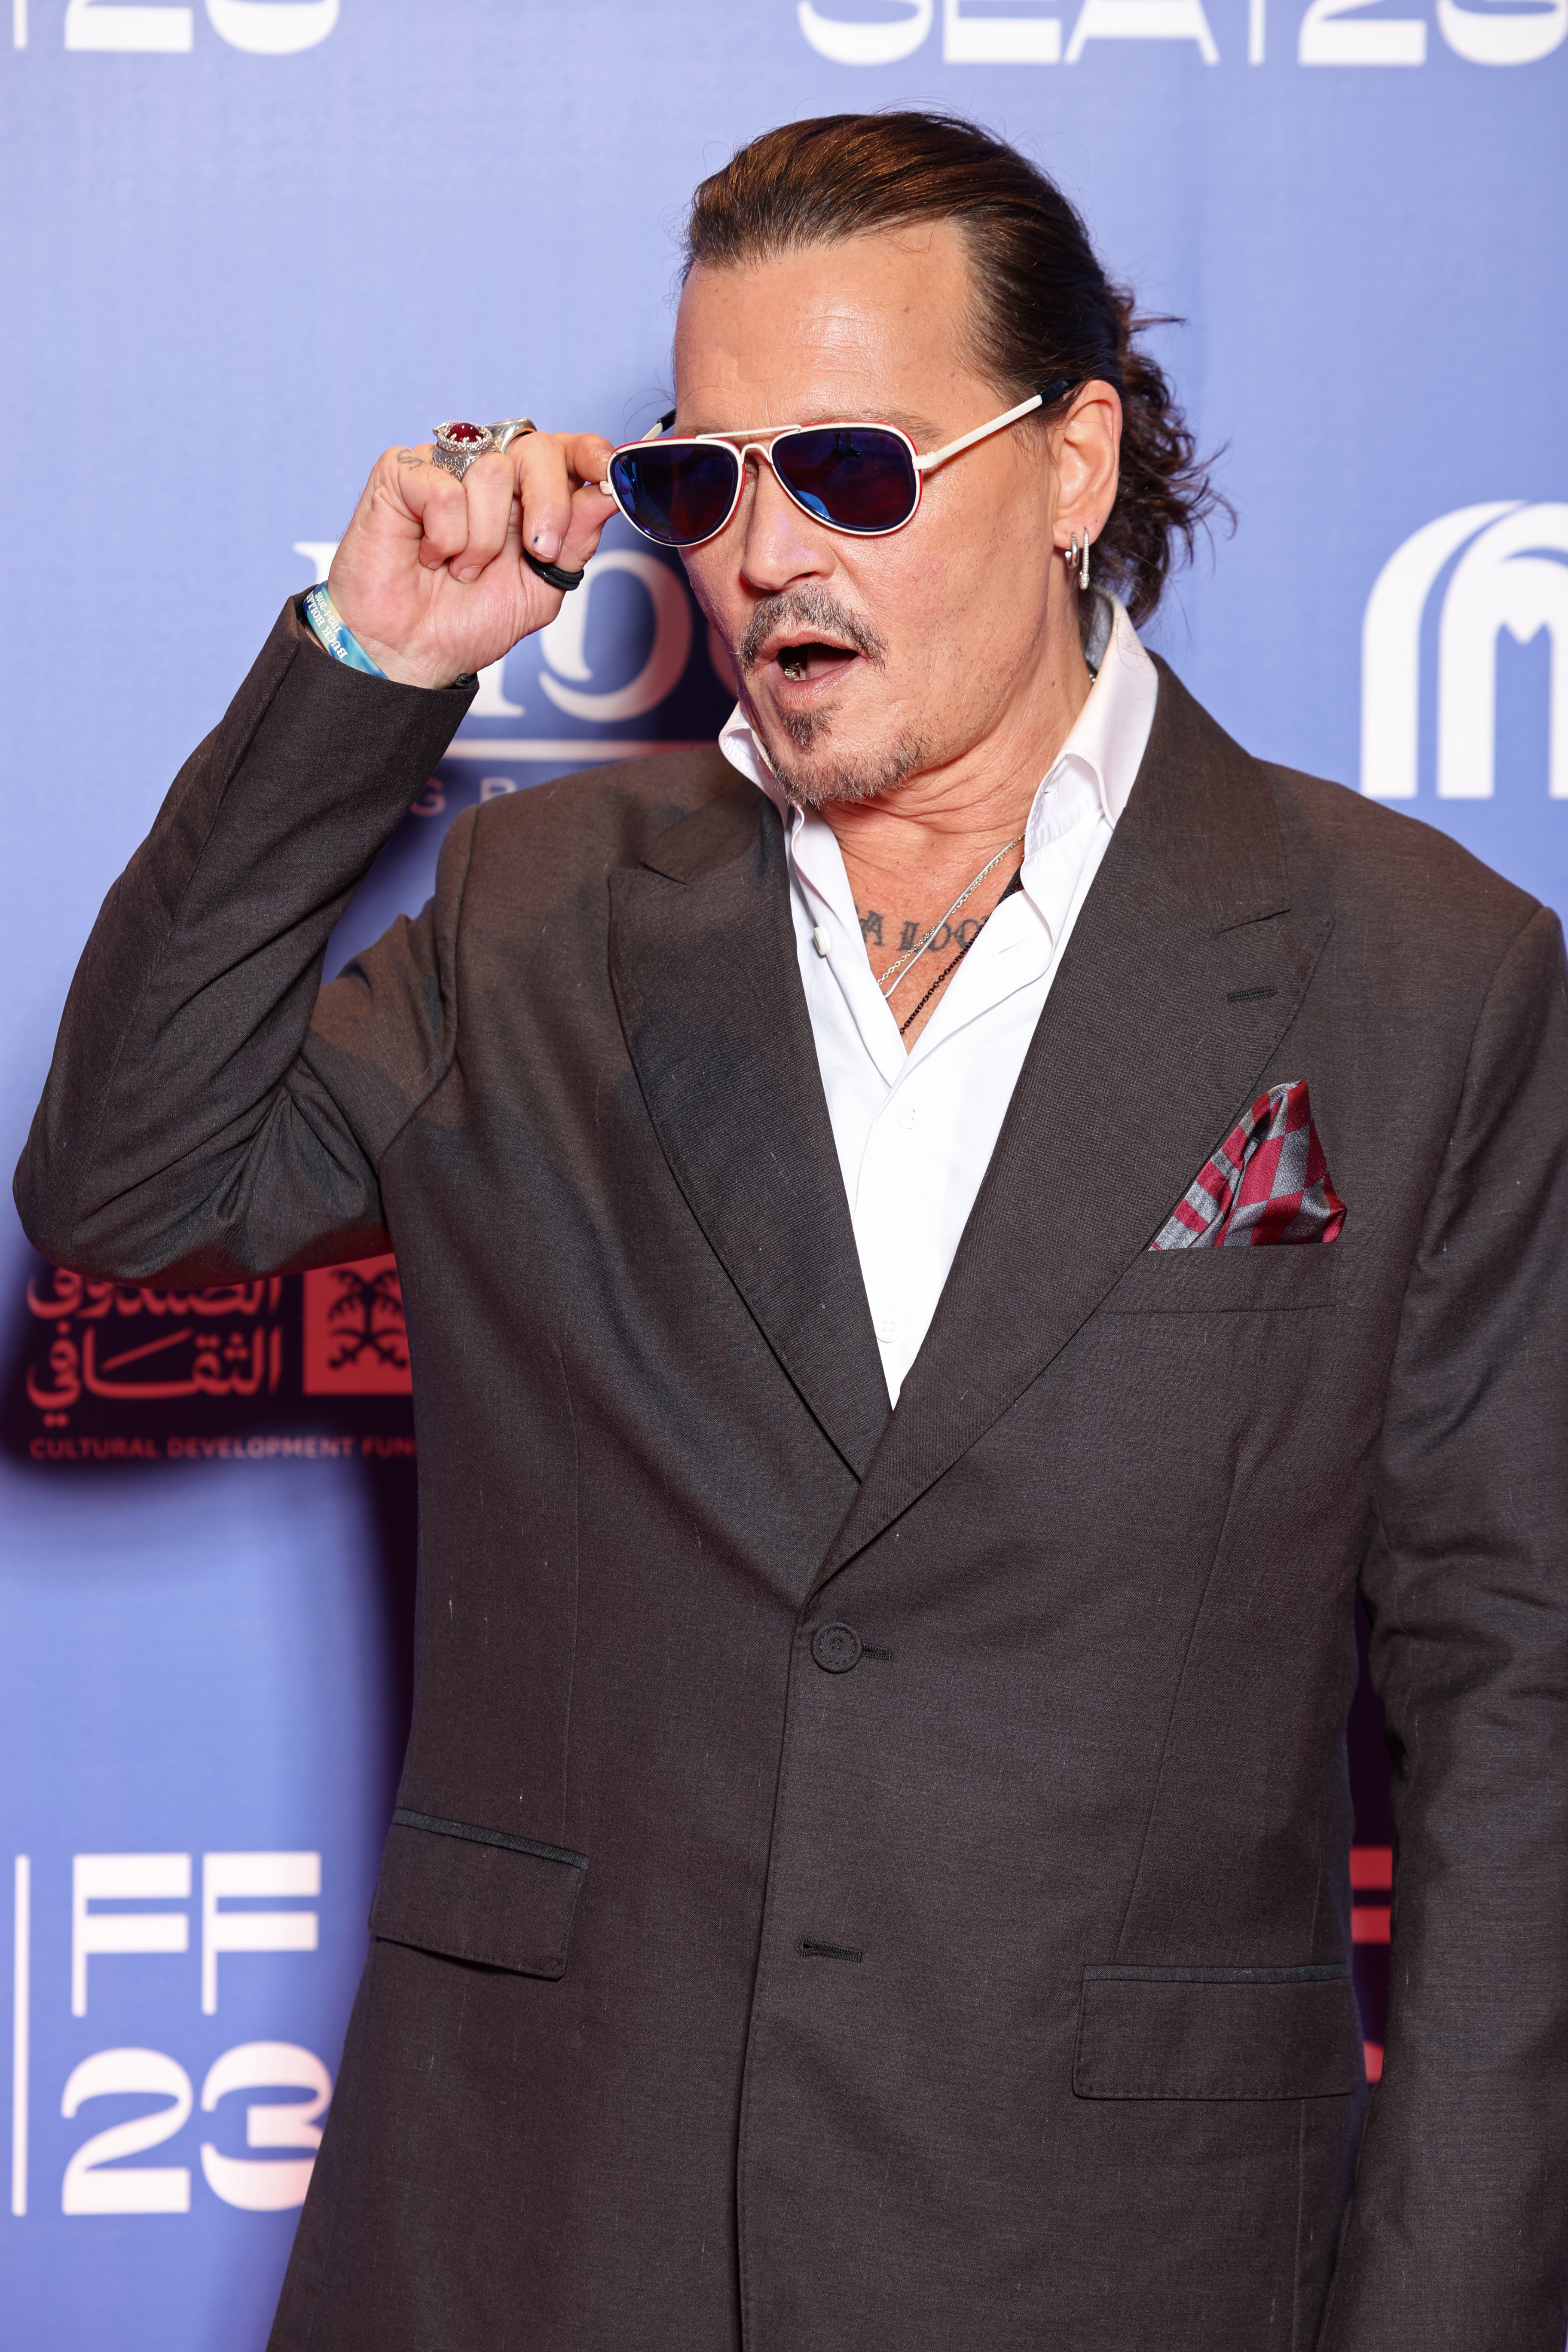 Johnny Depp in a grey suit, adjusting sunglasses, at an event